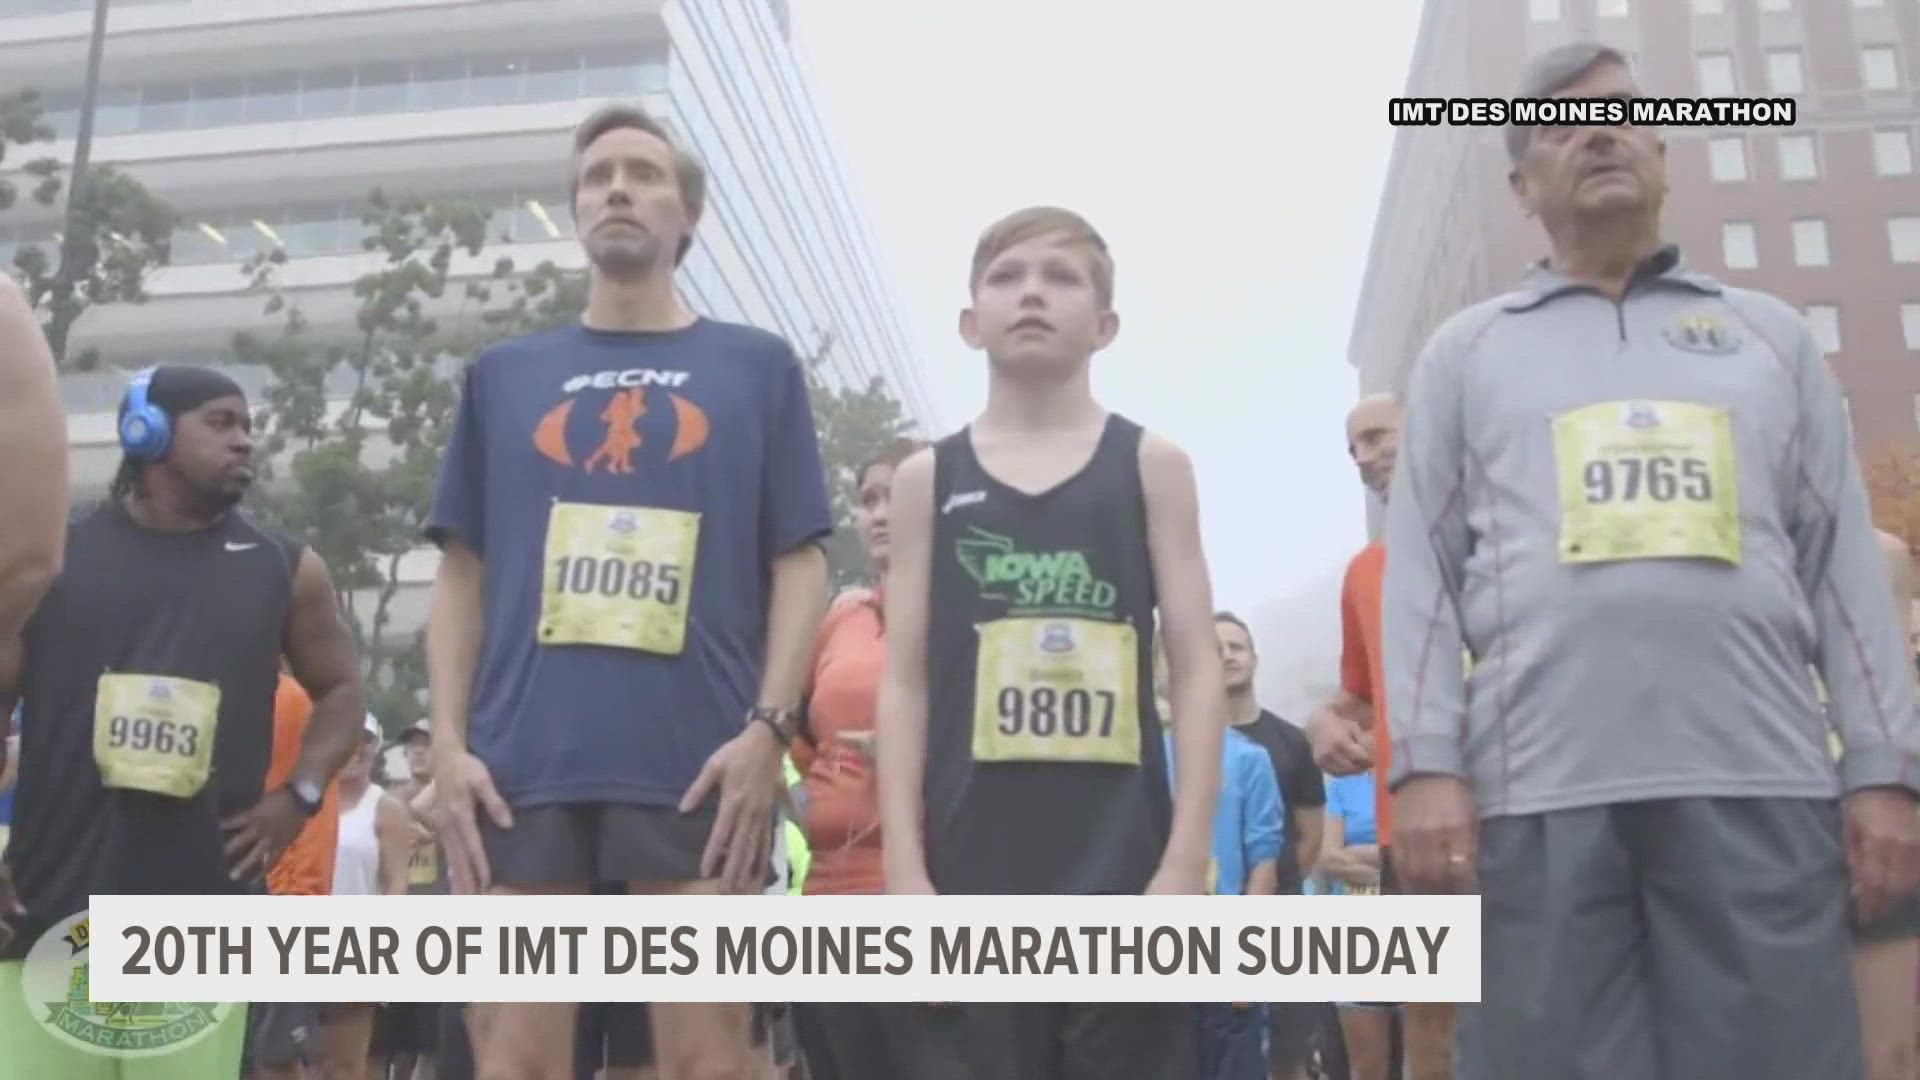 The 20th IMT Des Moines Marathon kicks off races this Saturday. The actual marathon will be on Sunday.